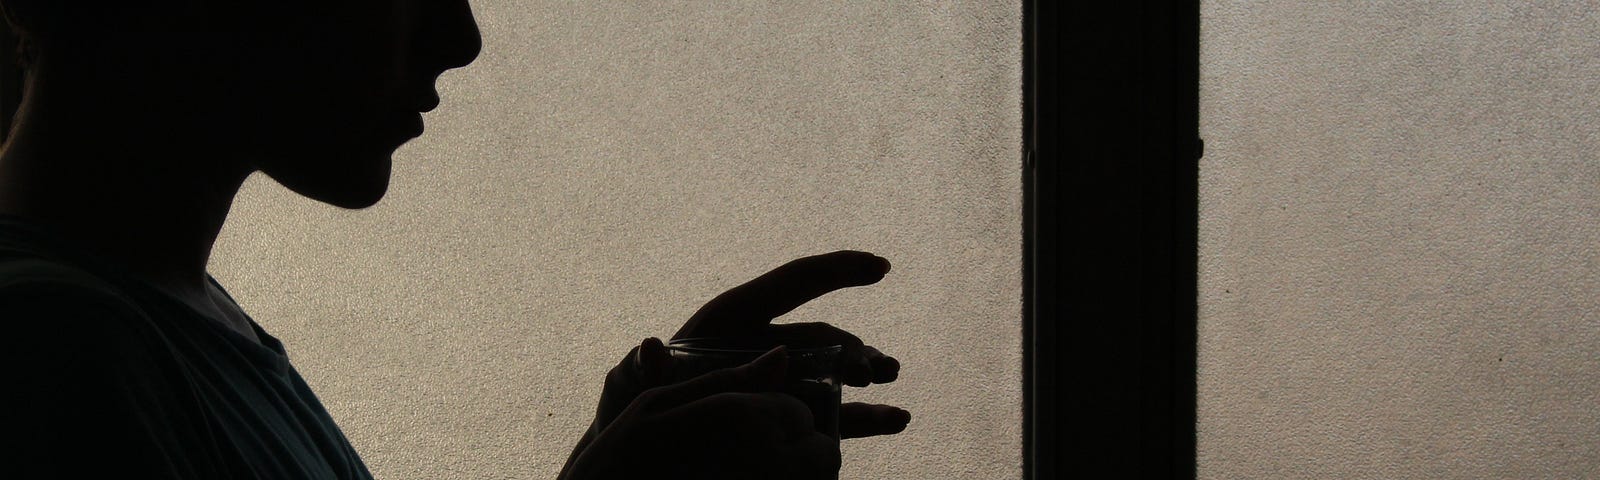 silhouette of a person holding a cup of tea or coffee, in front of a blurred window.